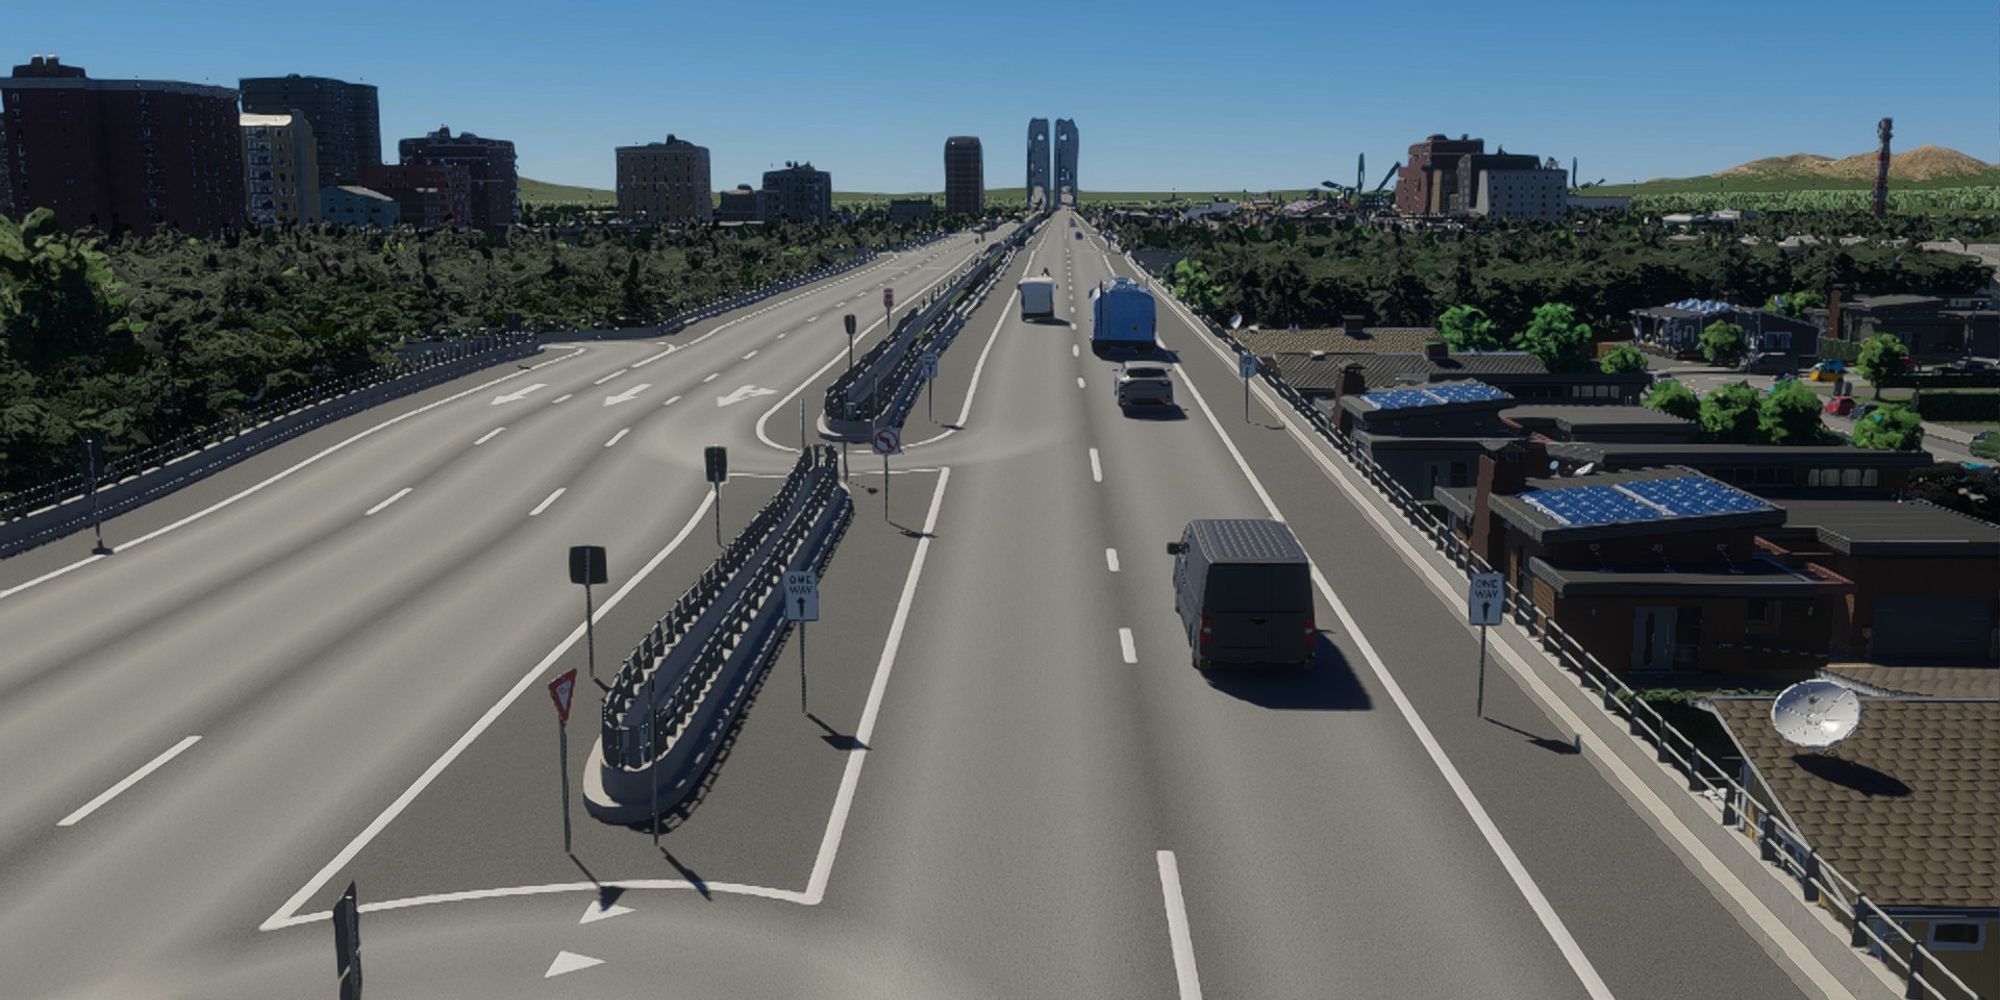 https://static1.thegamerimages.com/wordpress/wp-content/uploads/2023/11/cities-skylines-2-highway-from-low-angle-showing-cars-driving-and-buildings-to-the-side.jpg